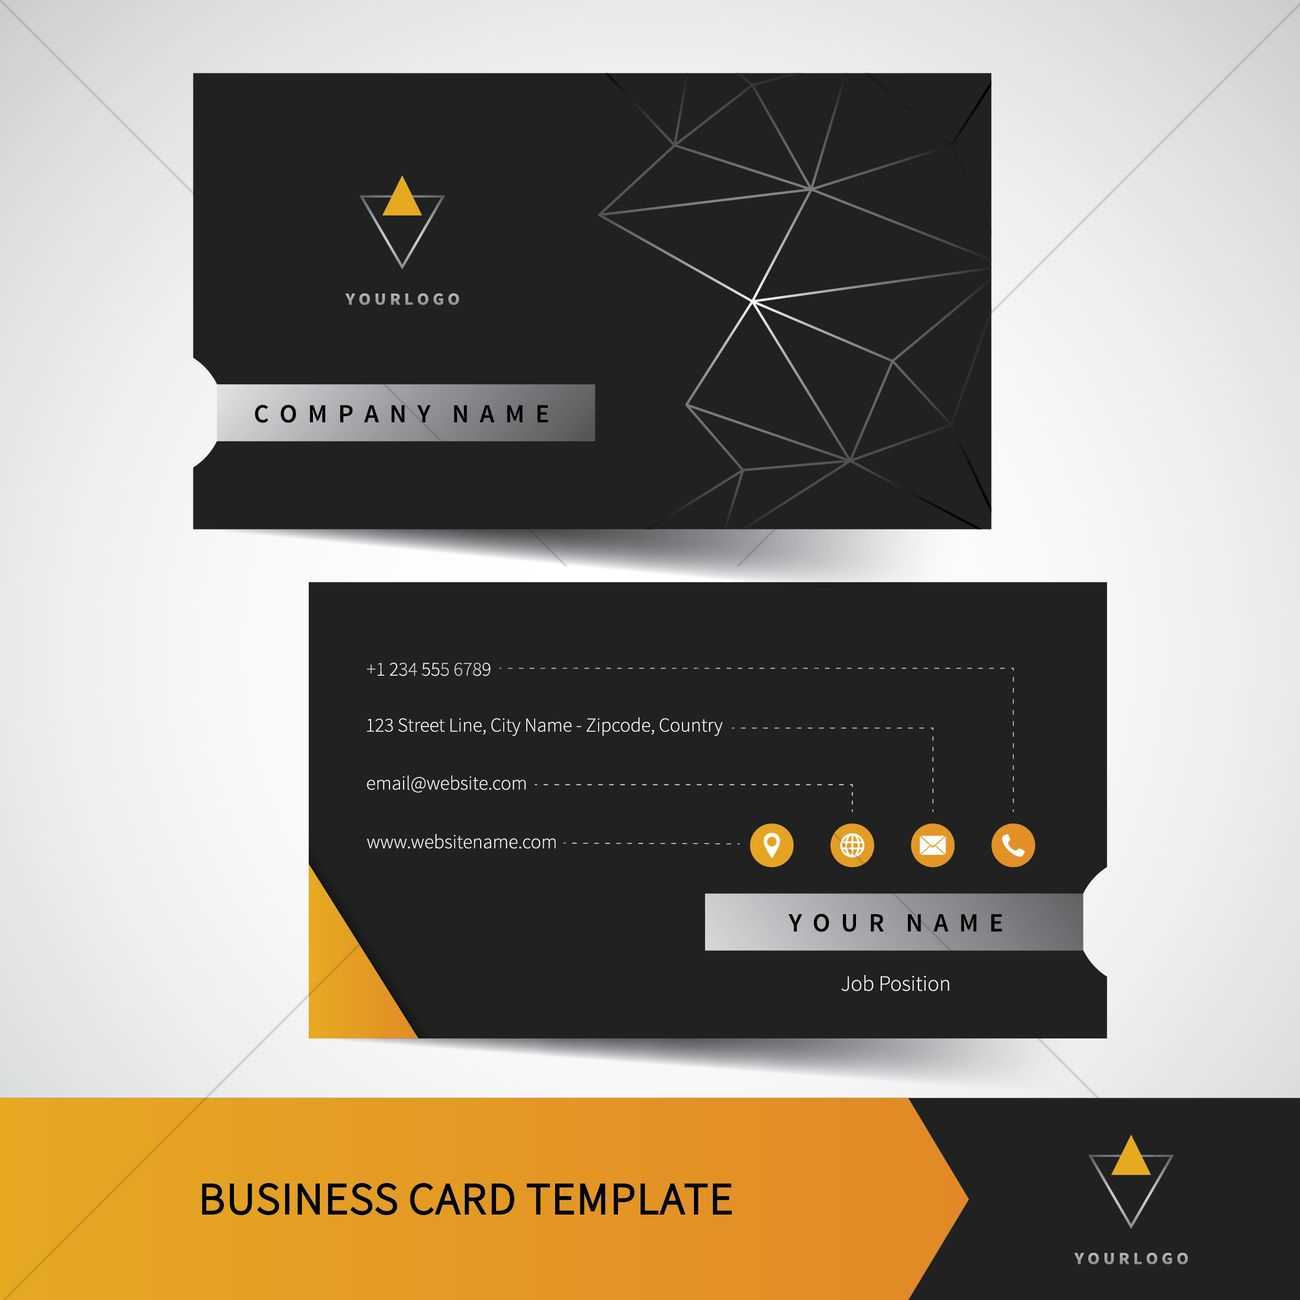 Business Card Template Vector Image – 1822199 | Stockunlimited For Email Business Card Templates